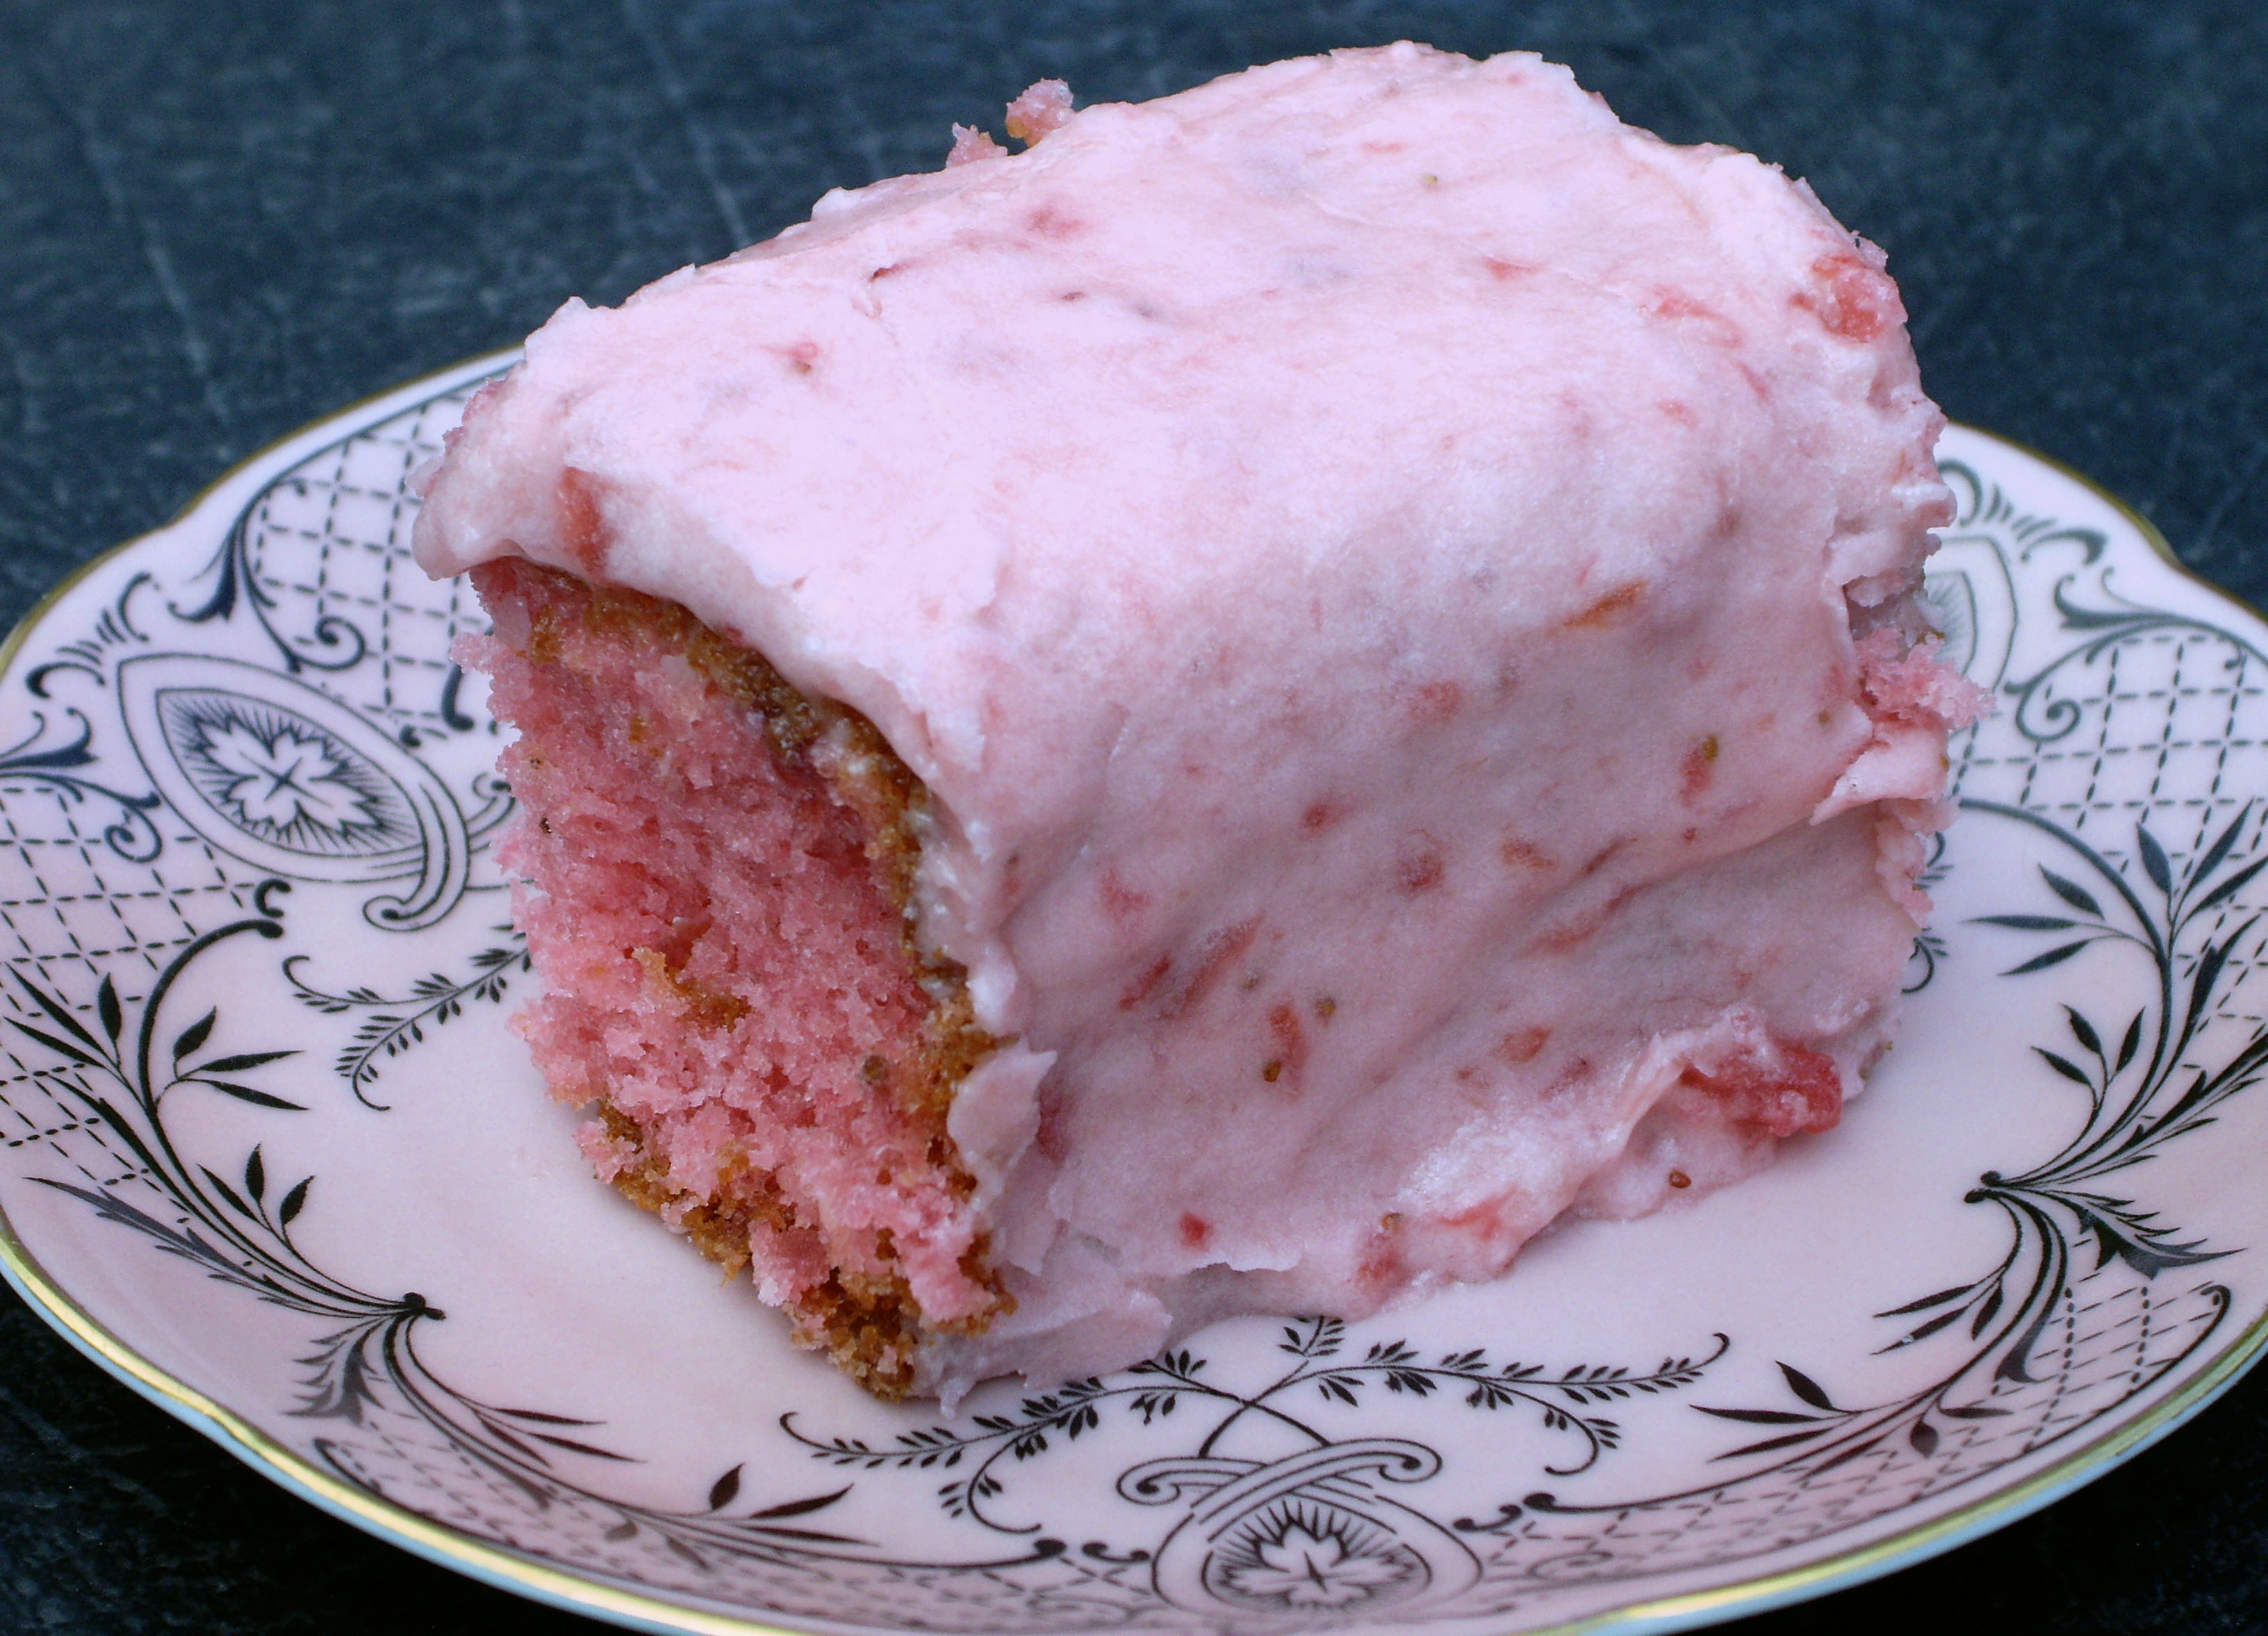 STRAWBERRY CAKE WITH FROSTING